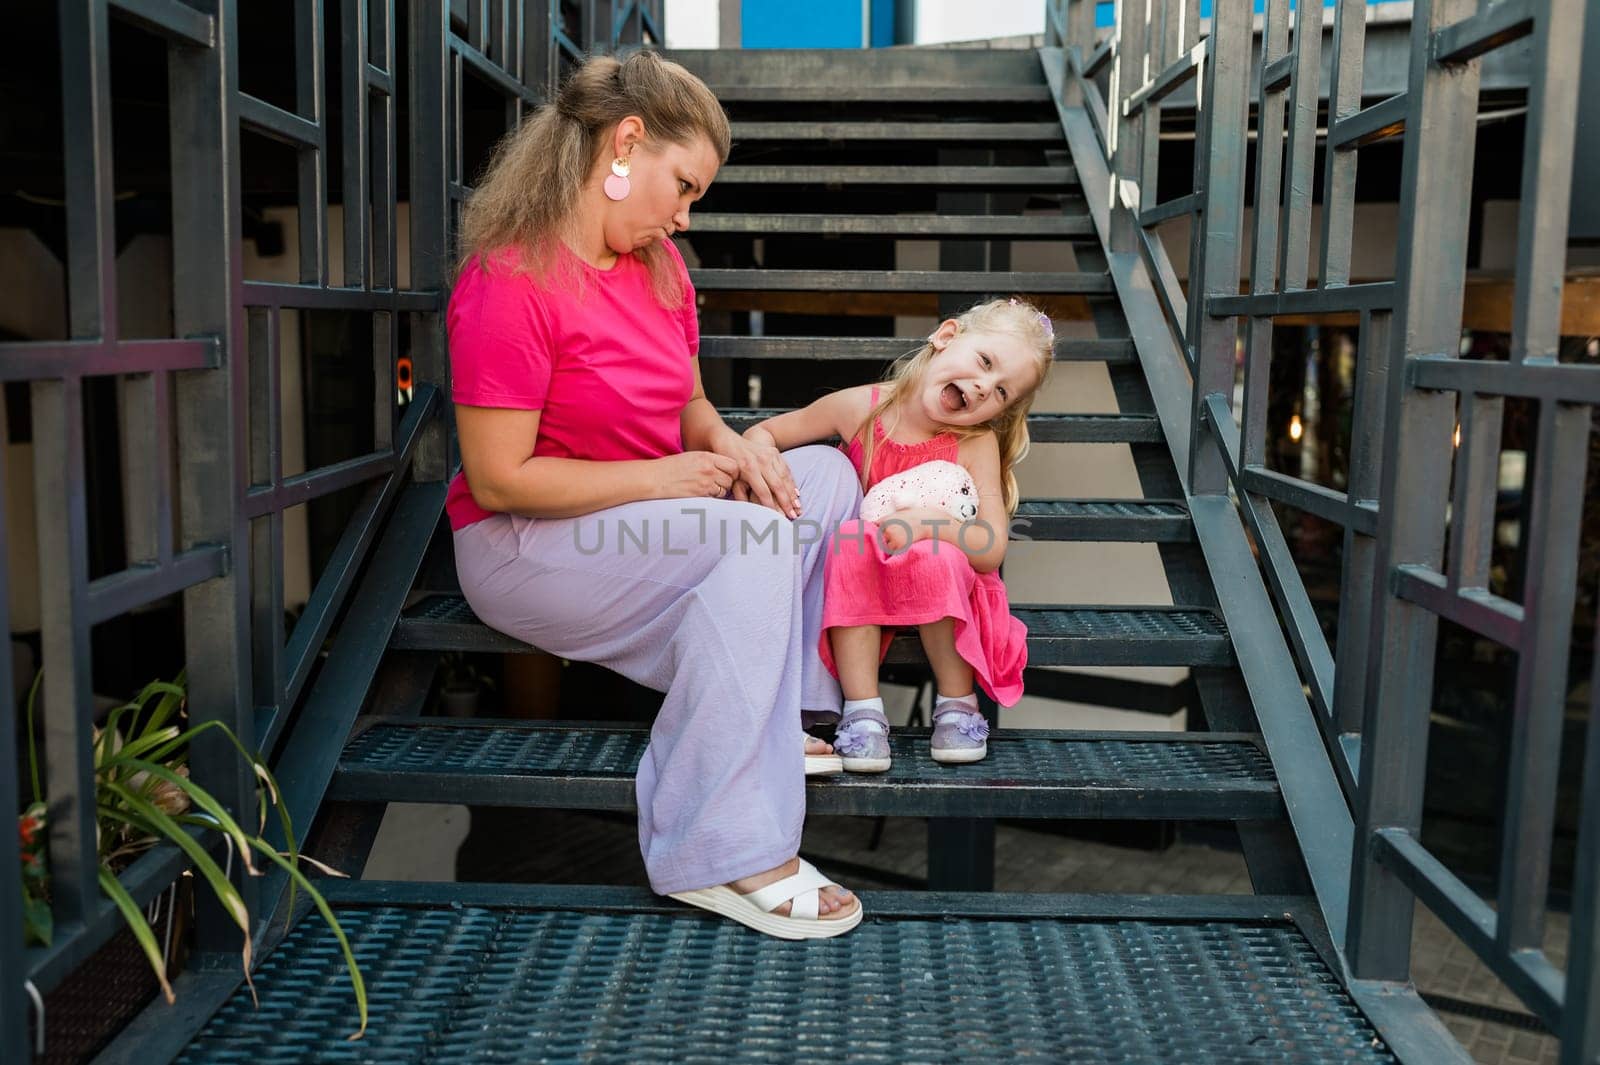 Child girl with cochlear implant with her mother spend time outdoor. Hear impairment and deaf community concept. Deaf and health concept. Diversity and inclusion. Copy space by Satura86